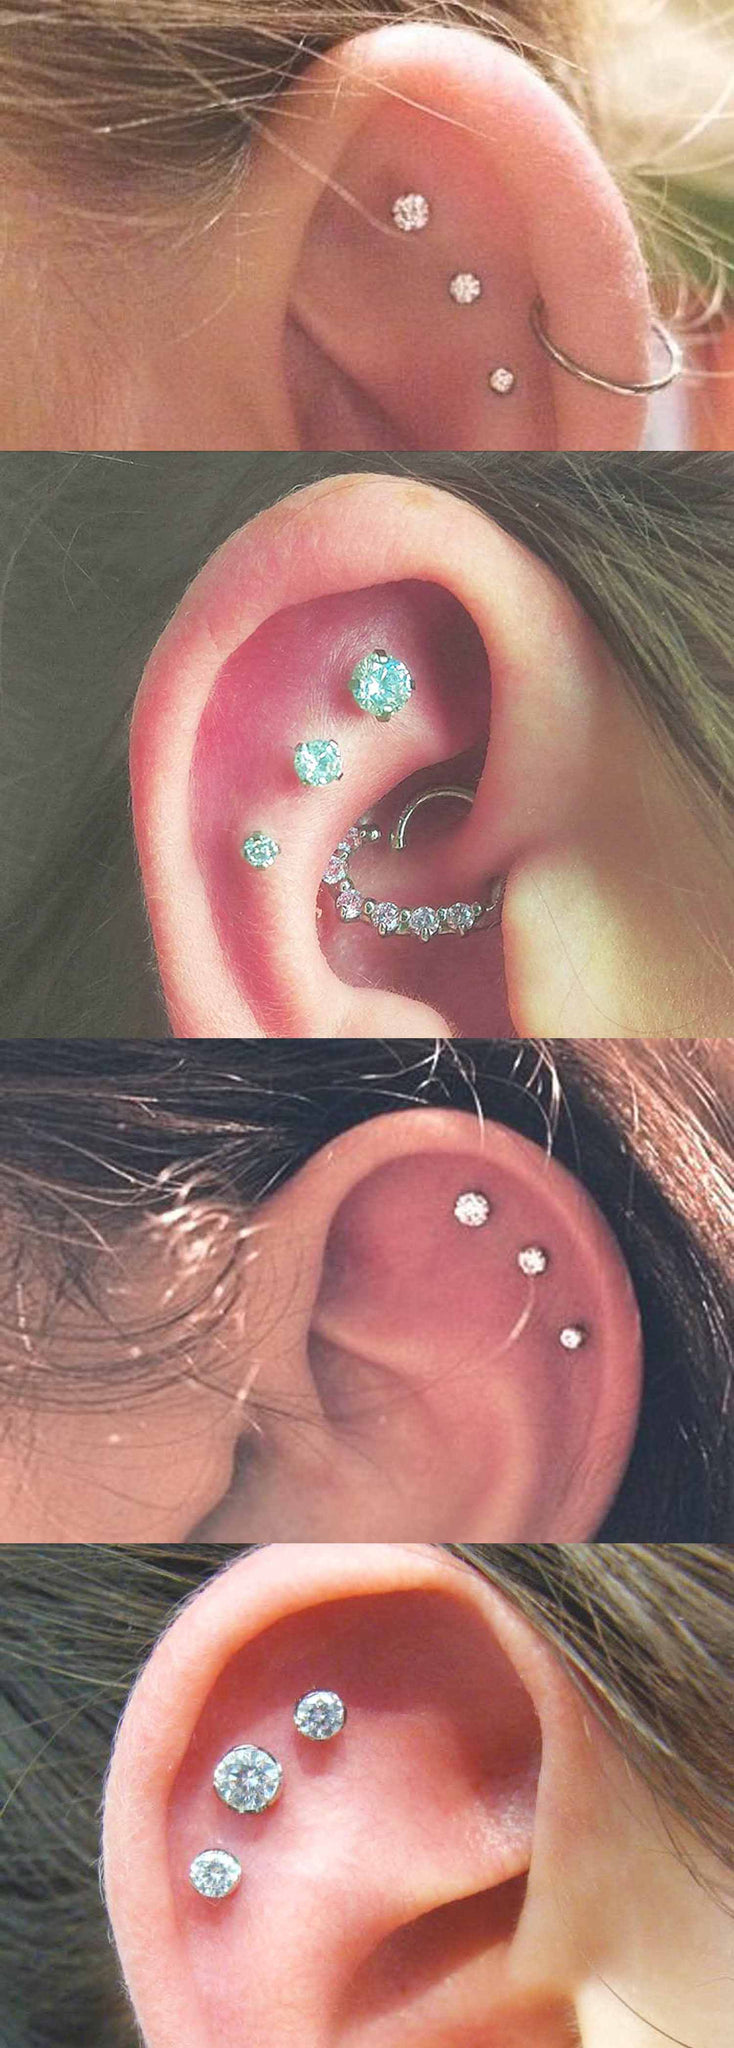 Cartilage Ear Piercing Ideas at MyBodiArt.com - Upper All the Way Up Jewelry - Triple Constellation Stud Earrings 